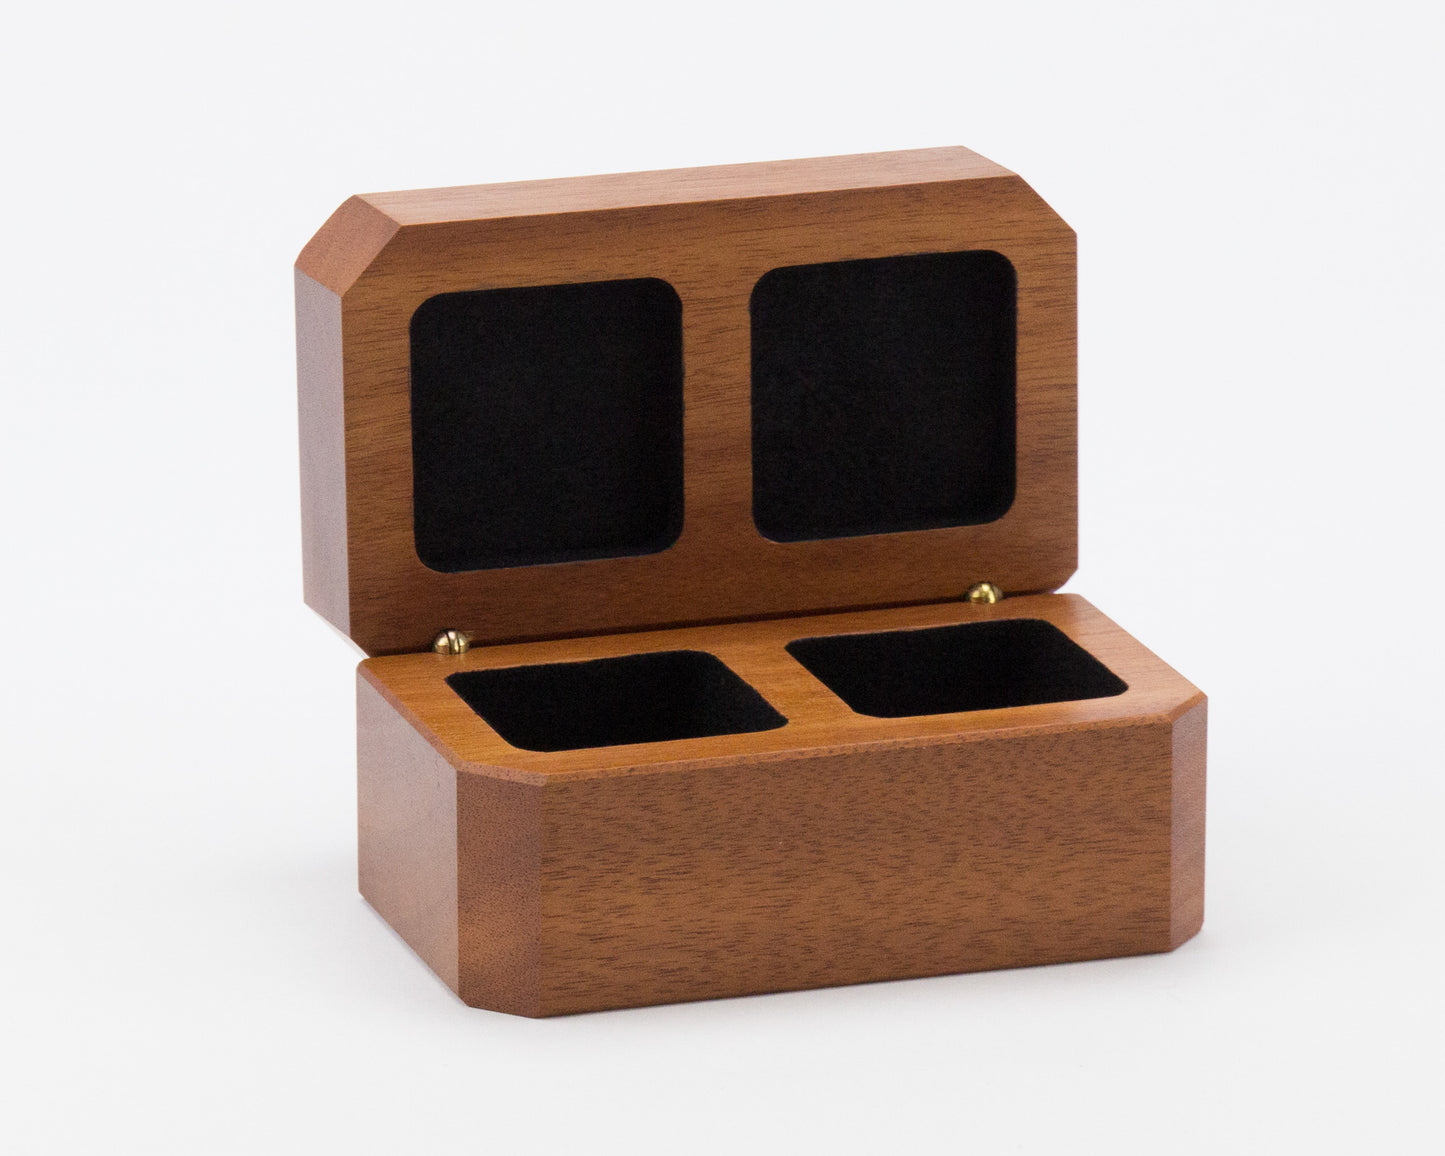 Wooden Double Ring Box handcrafted from NSW Rosewood